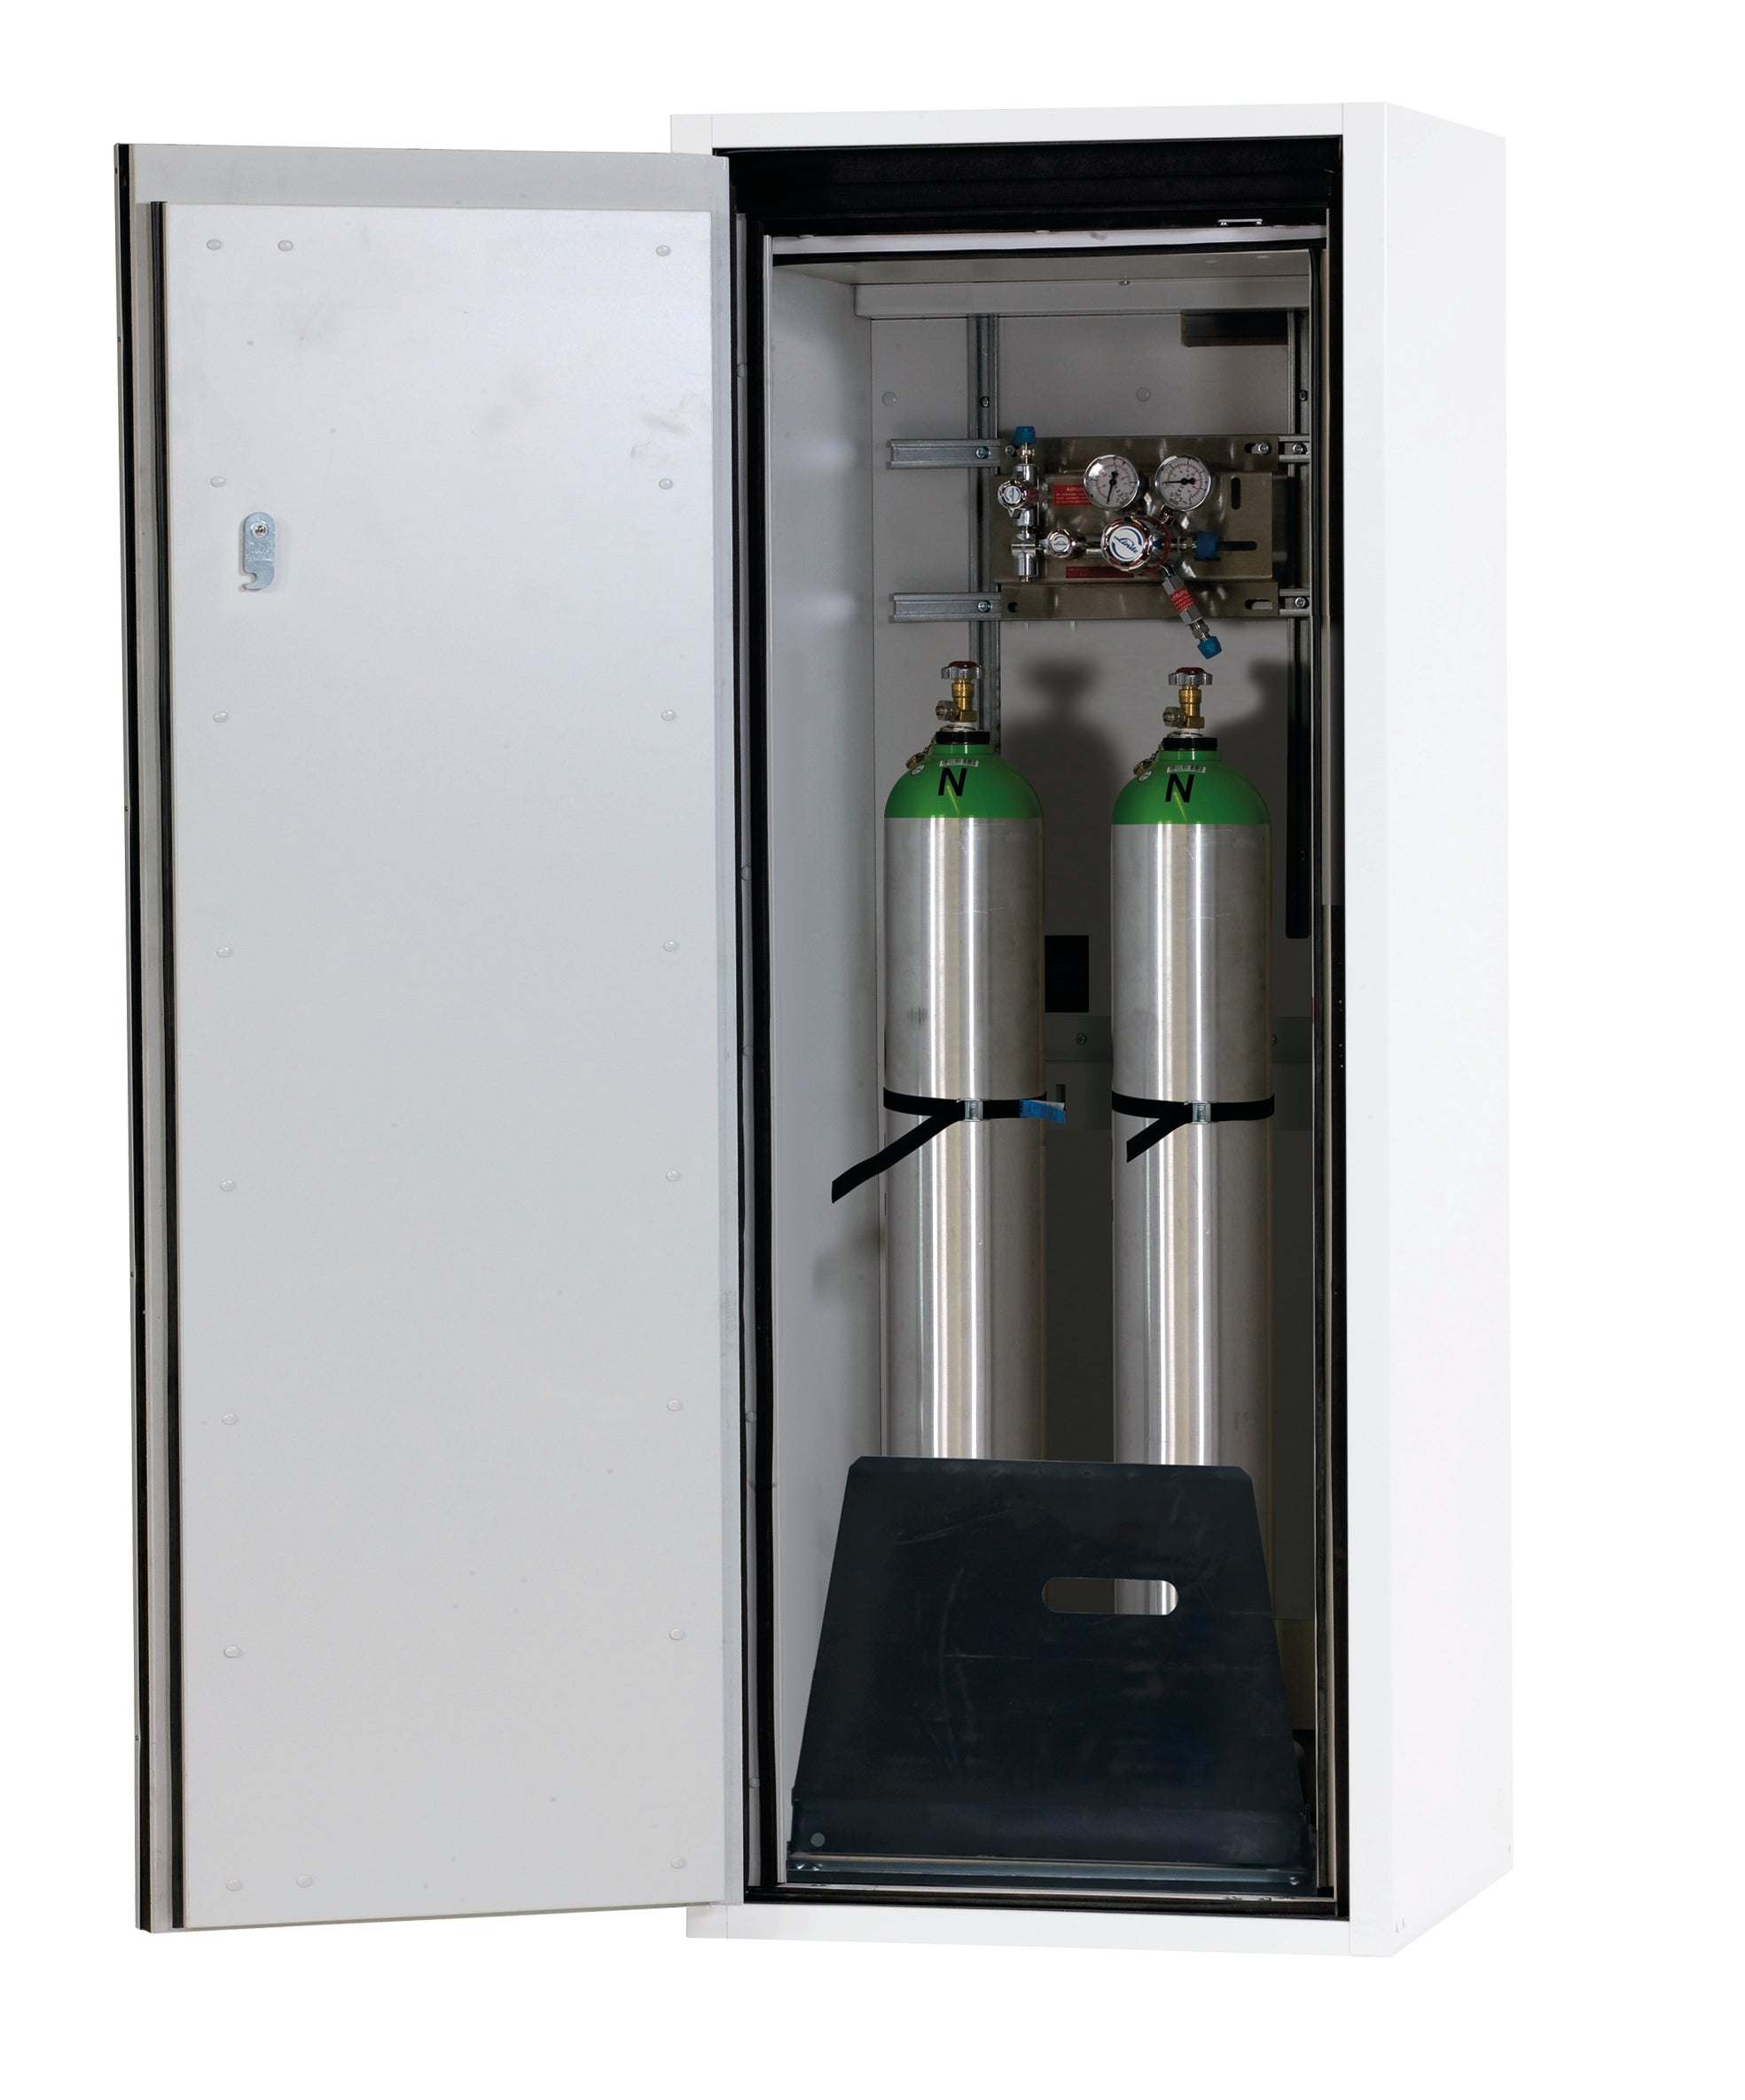 Type 90 compressed gas bottle cabinet G-ULTIMATE-90 model G90.145.060 in laboratory white (similar to RAL 9016) with standard interior fittings for 2x compressed gas bottles of 10 liters each